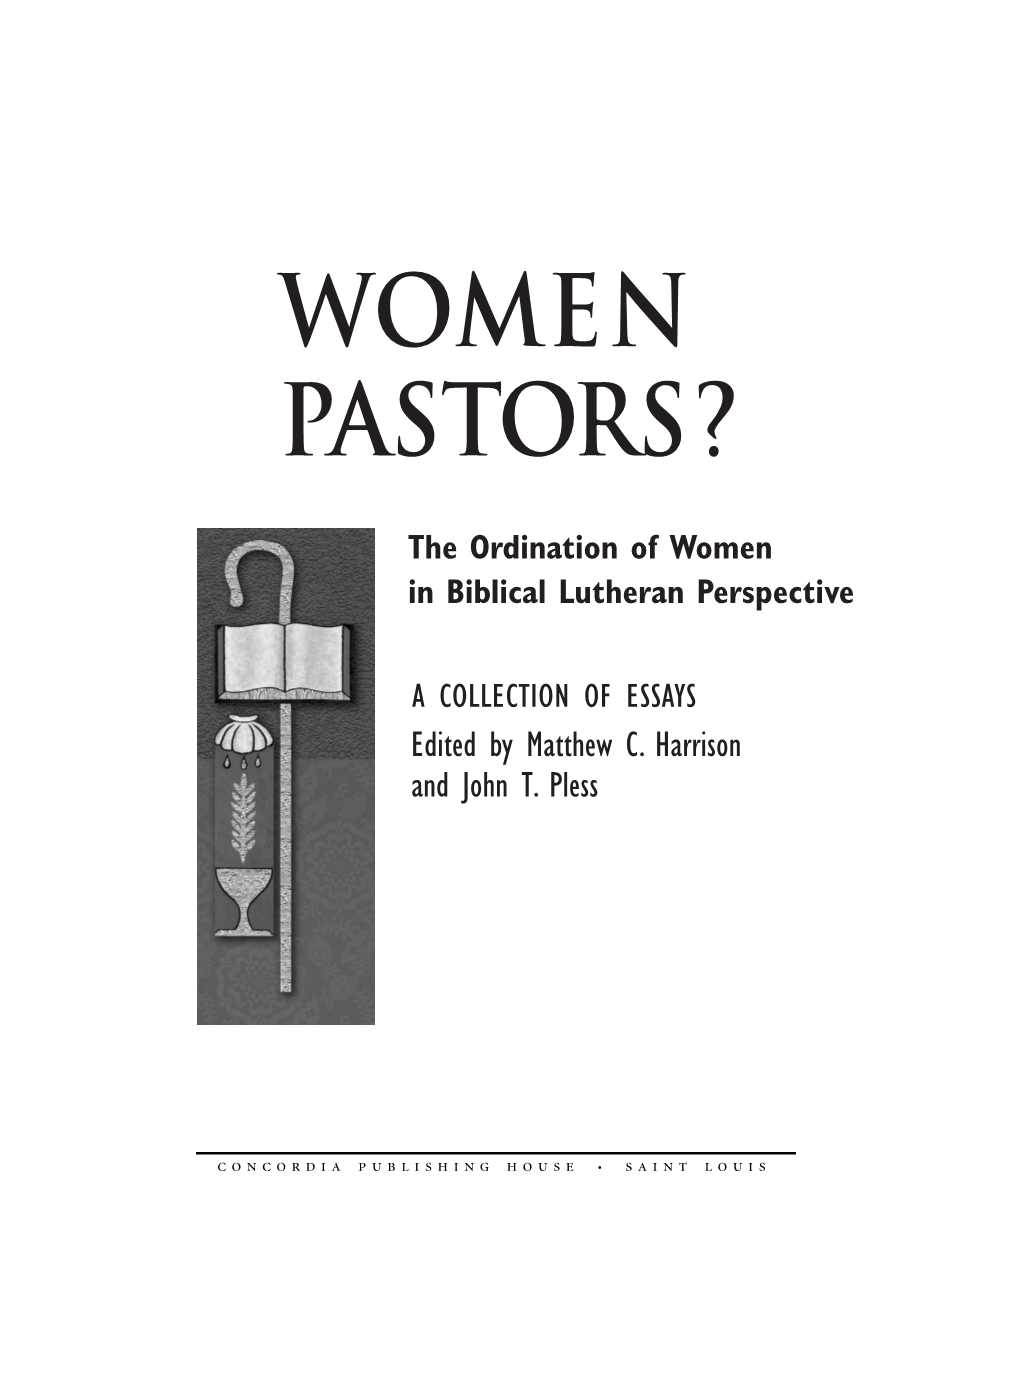 WOMEN PASTORS? and People Endure in Sweden for Their Refusal to Compromise Biblical Truth